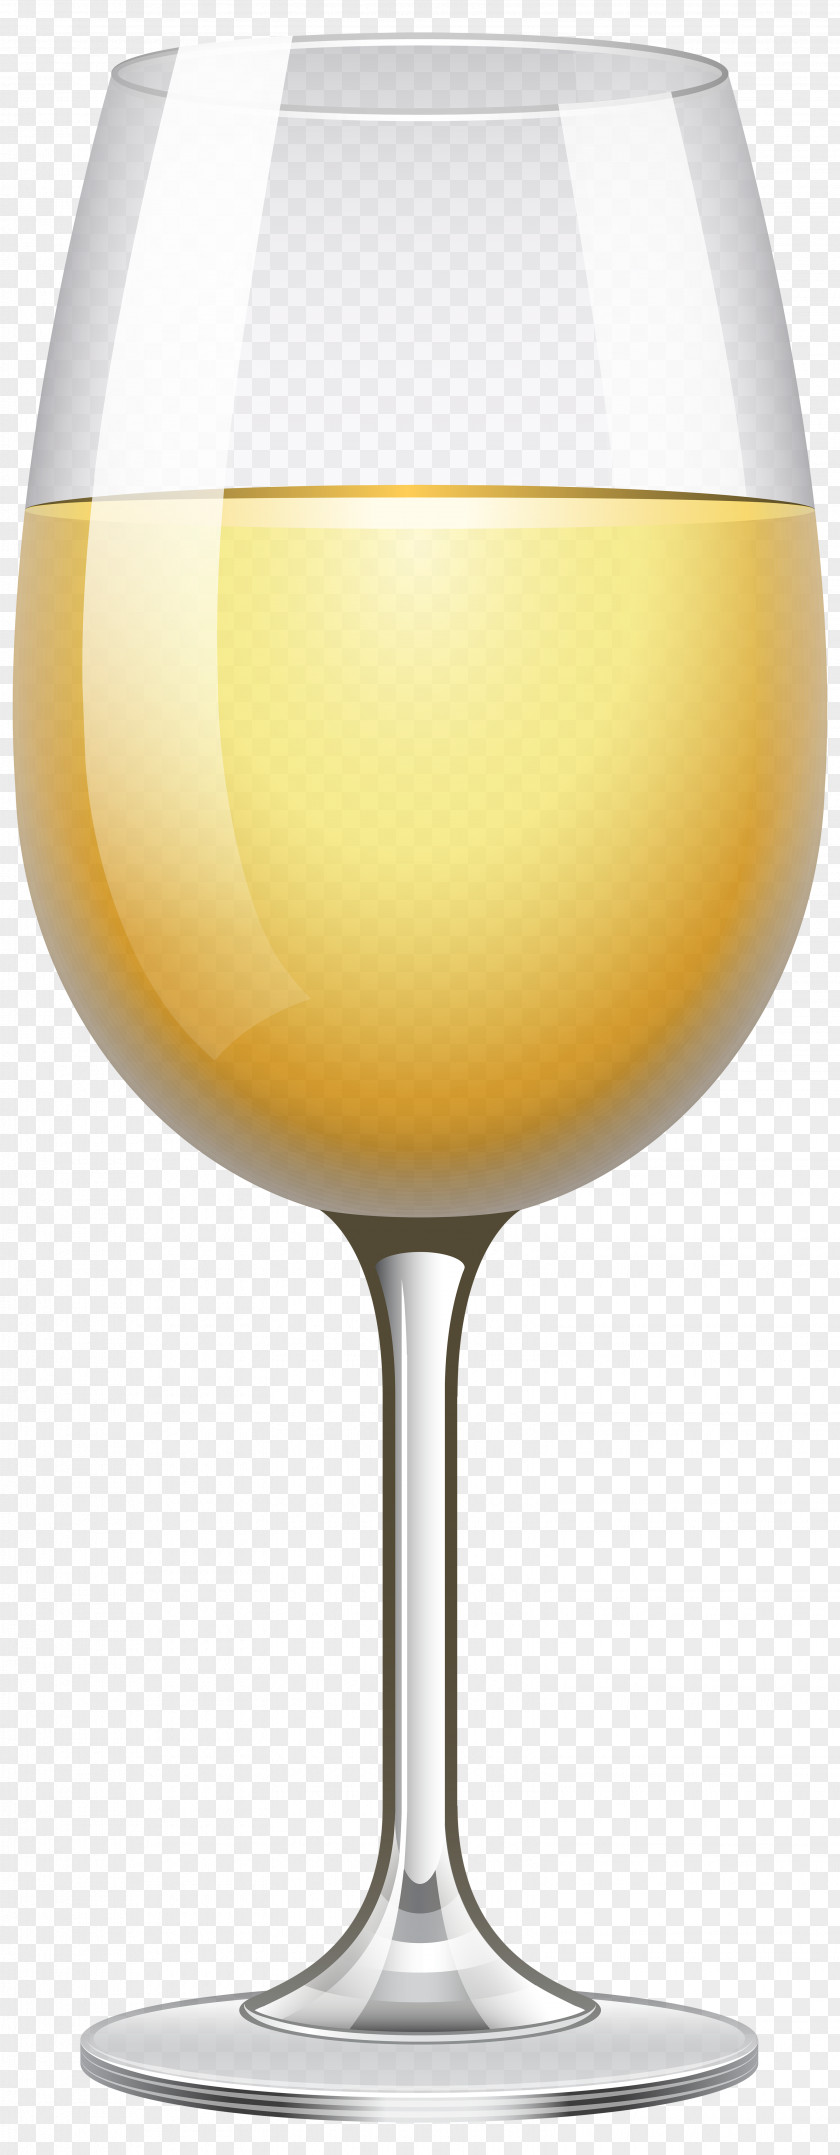 White Wine Glass Transparent Clip Art Image Red Cocktail Champagne PNG